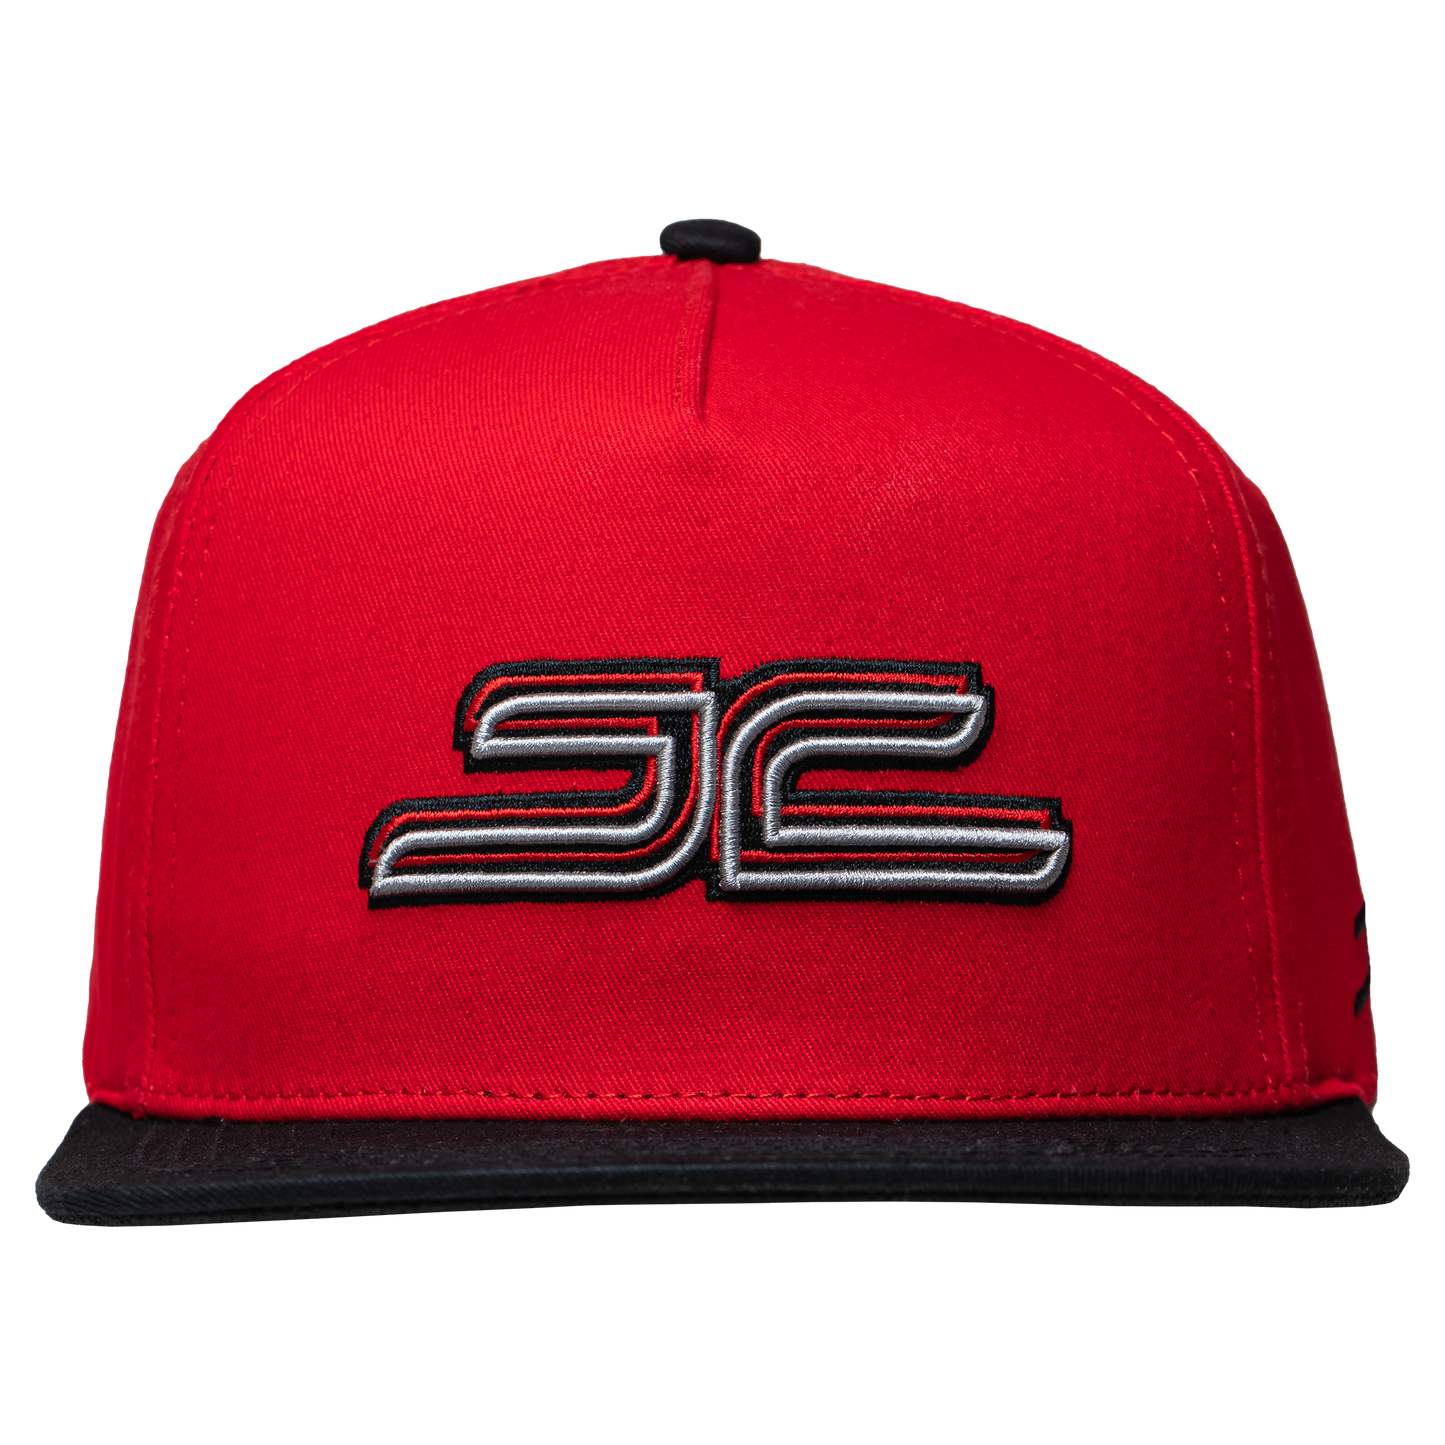 
                  
                    JC CLASSIC RED
                  
                